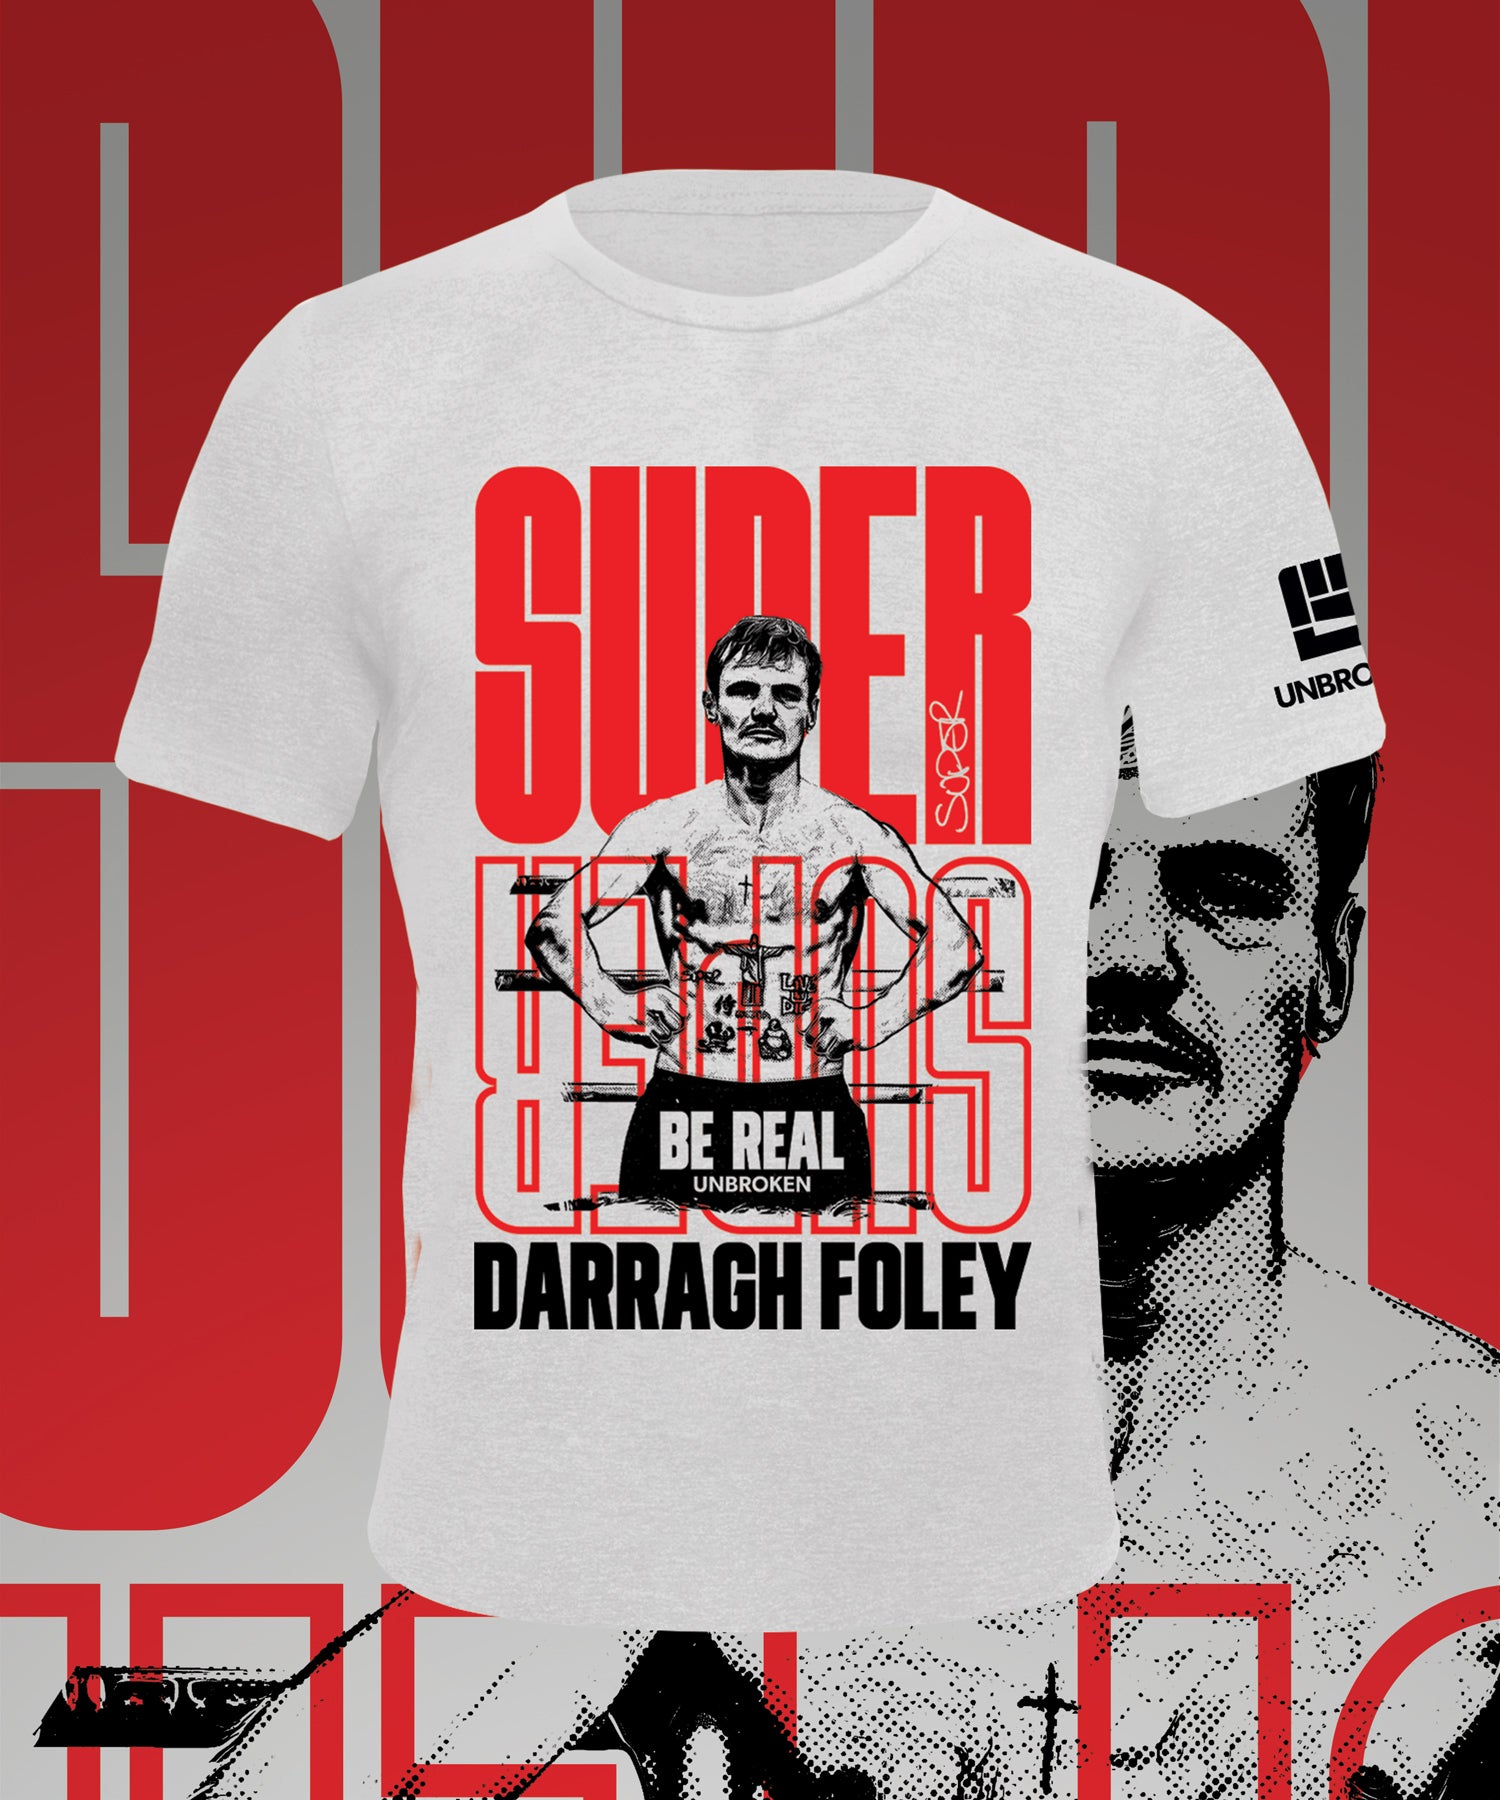 DARRAGH FOLEY Performance Tee in White